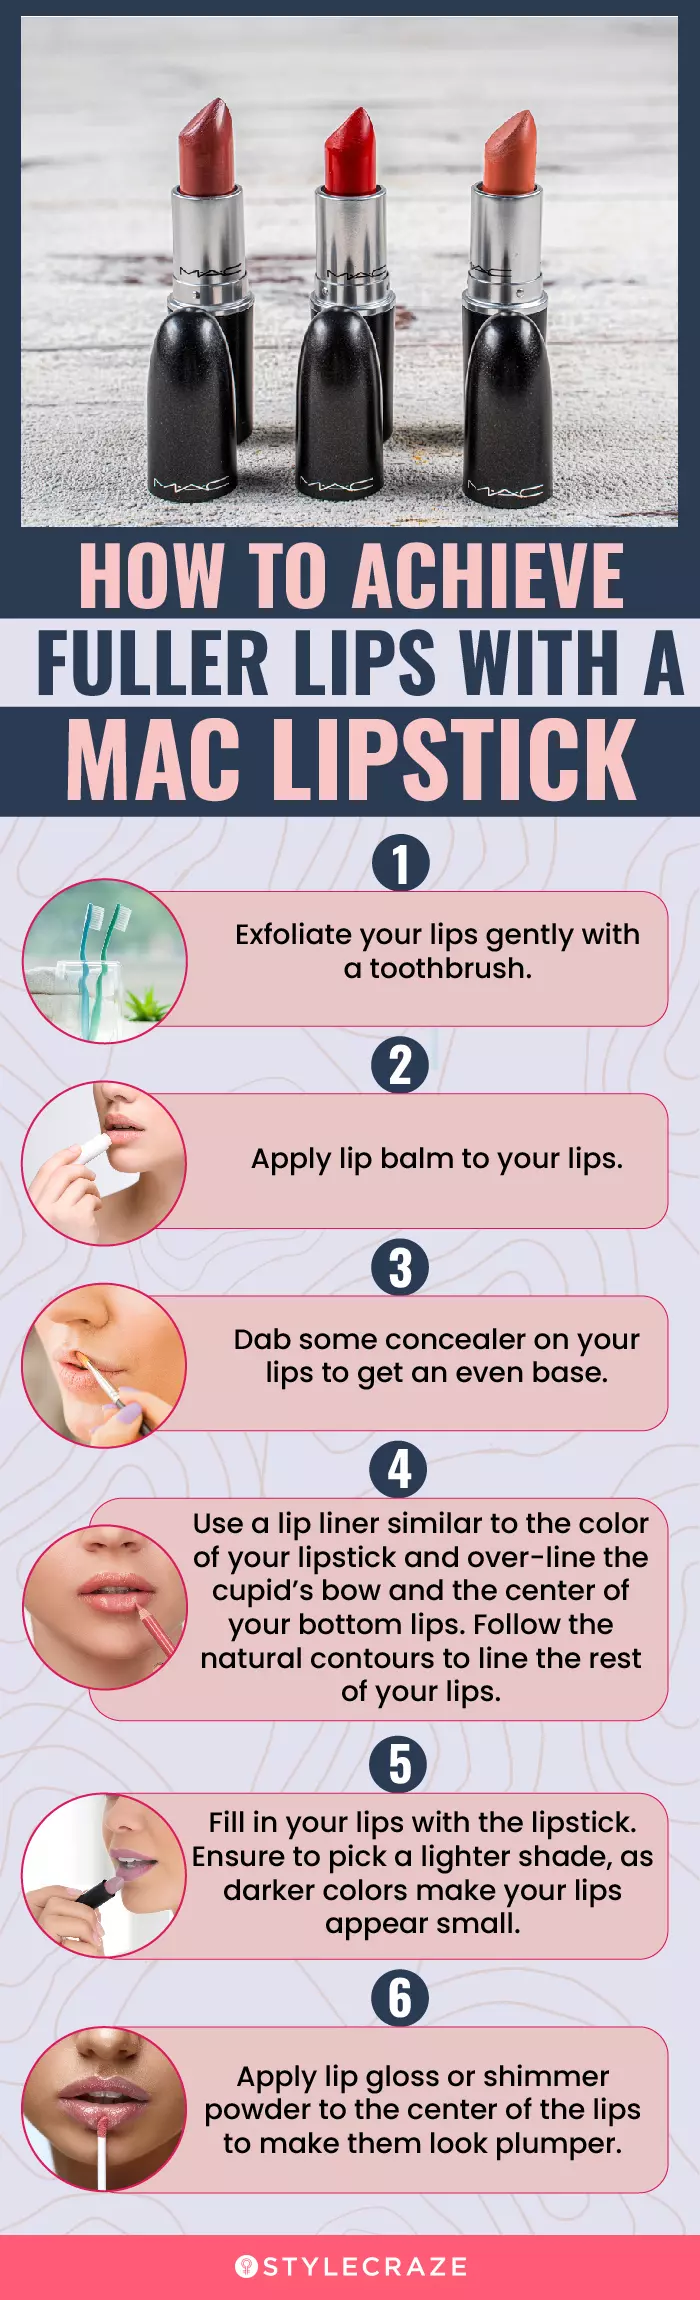 How To Achieve Fuller Lips With A MAC Lipstick (infographic)